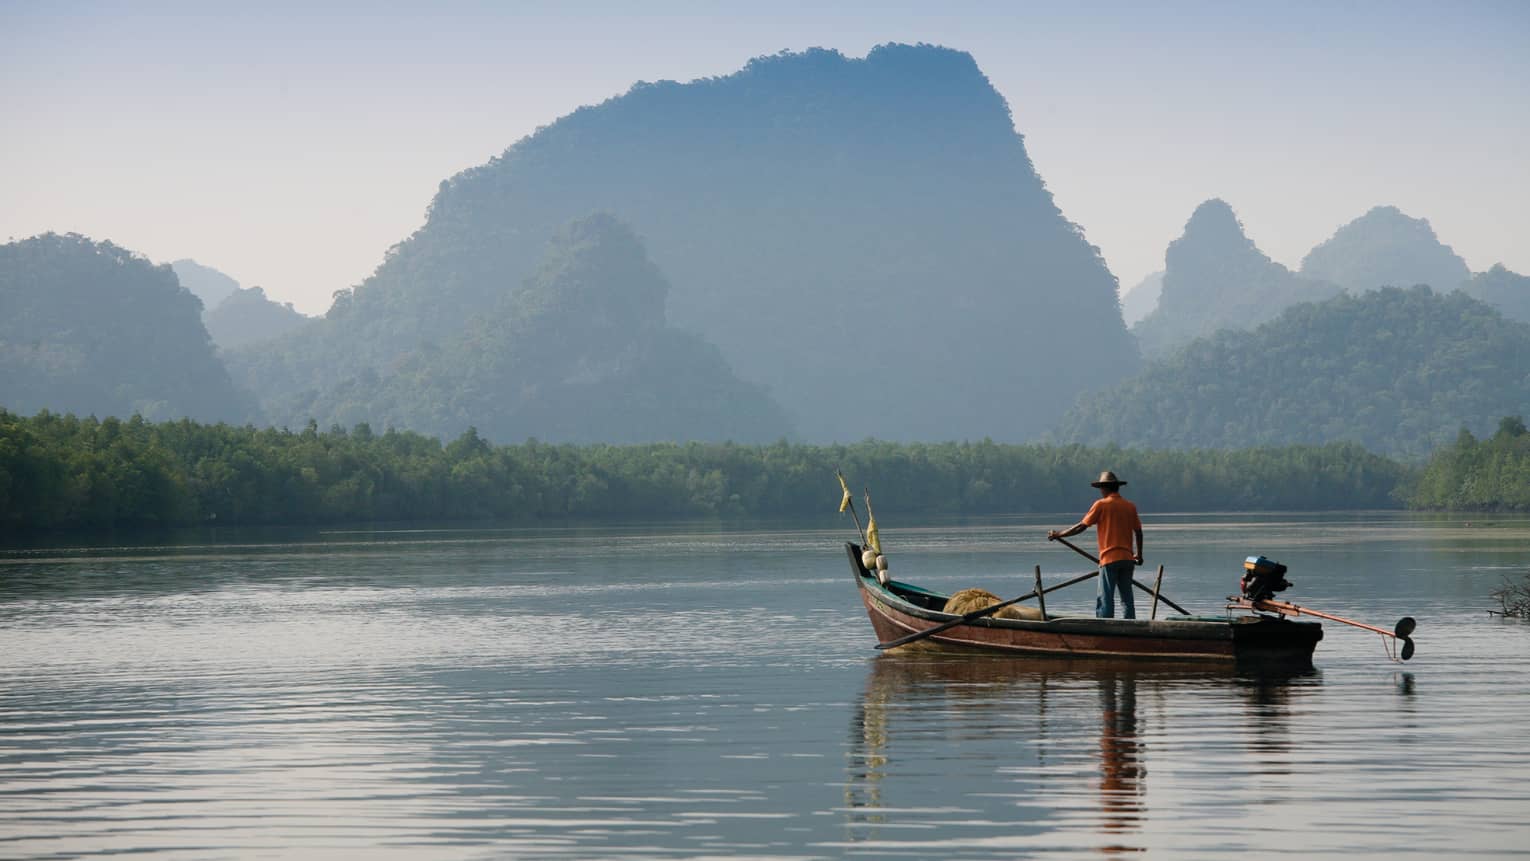 Man in a boat on Langkawi river with mountains in the background